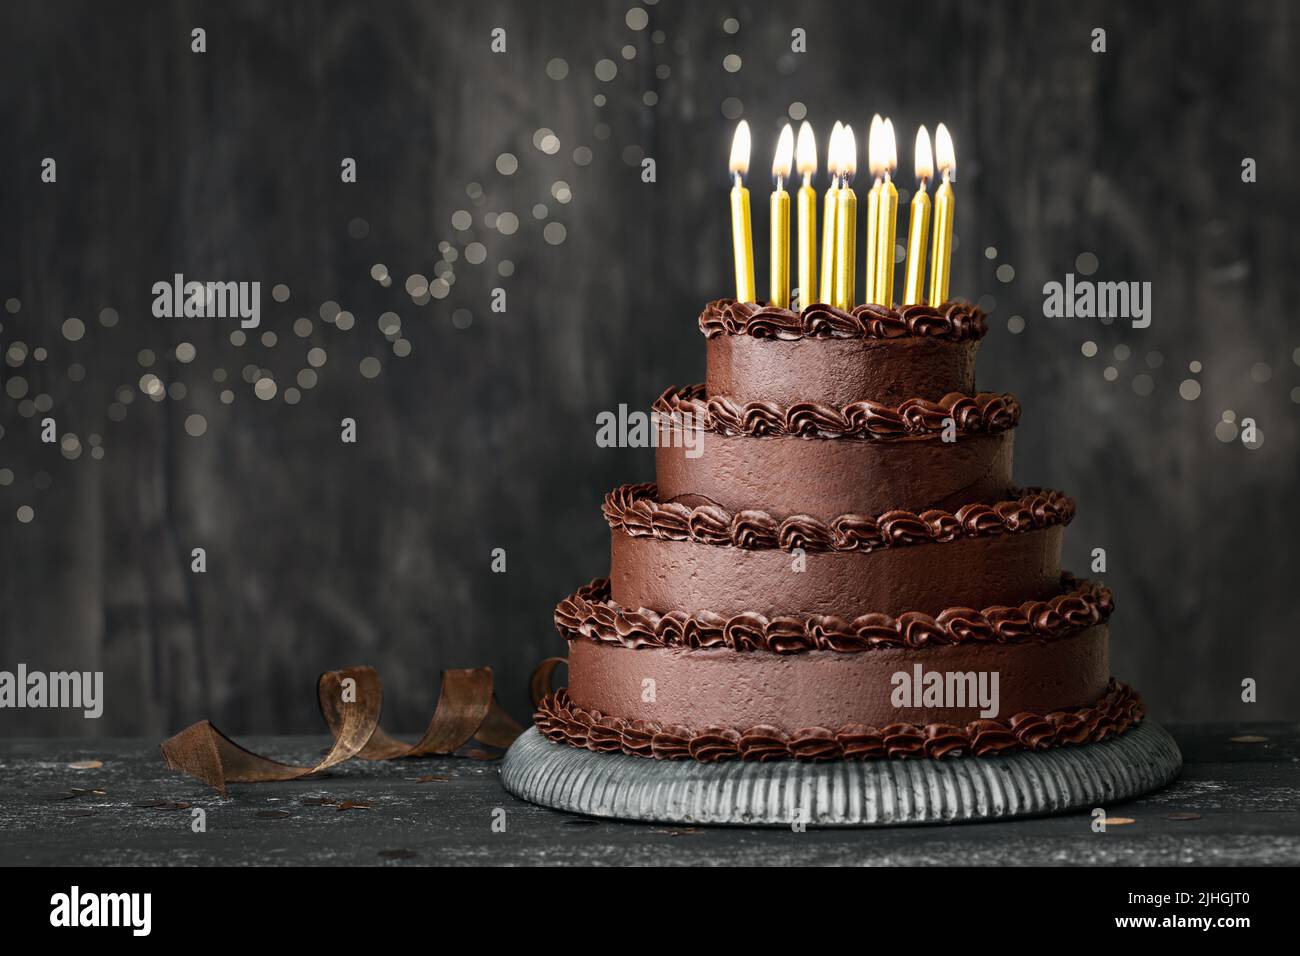 Tiered chocolate birthday cake decorated with chocolated frosting and gold birthday candles Stock Photo